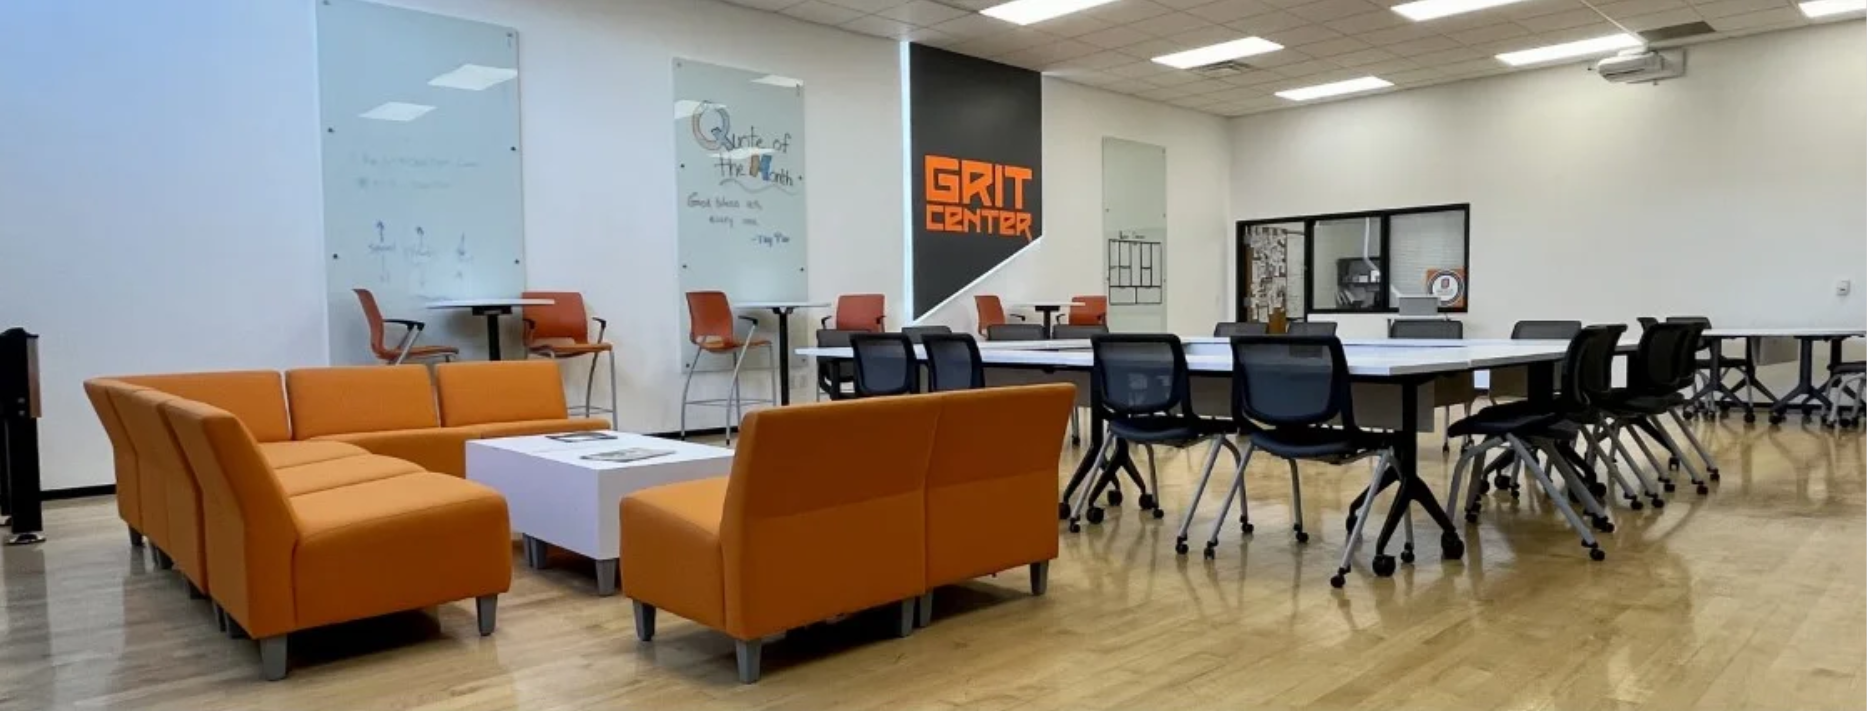 Image of the GRIT Center facility